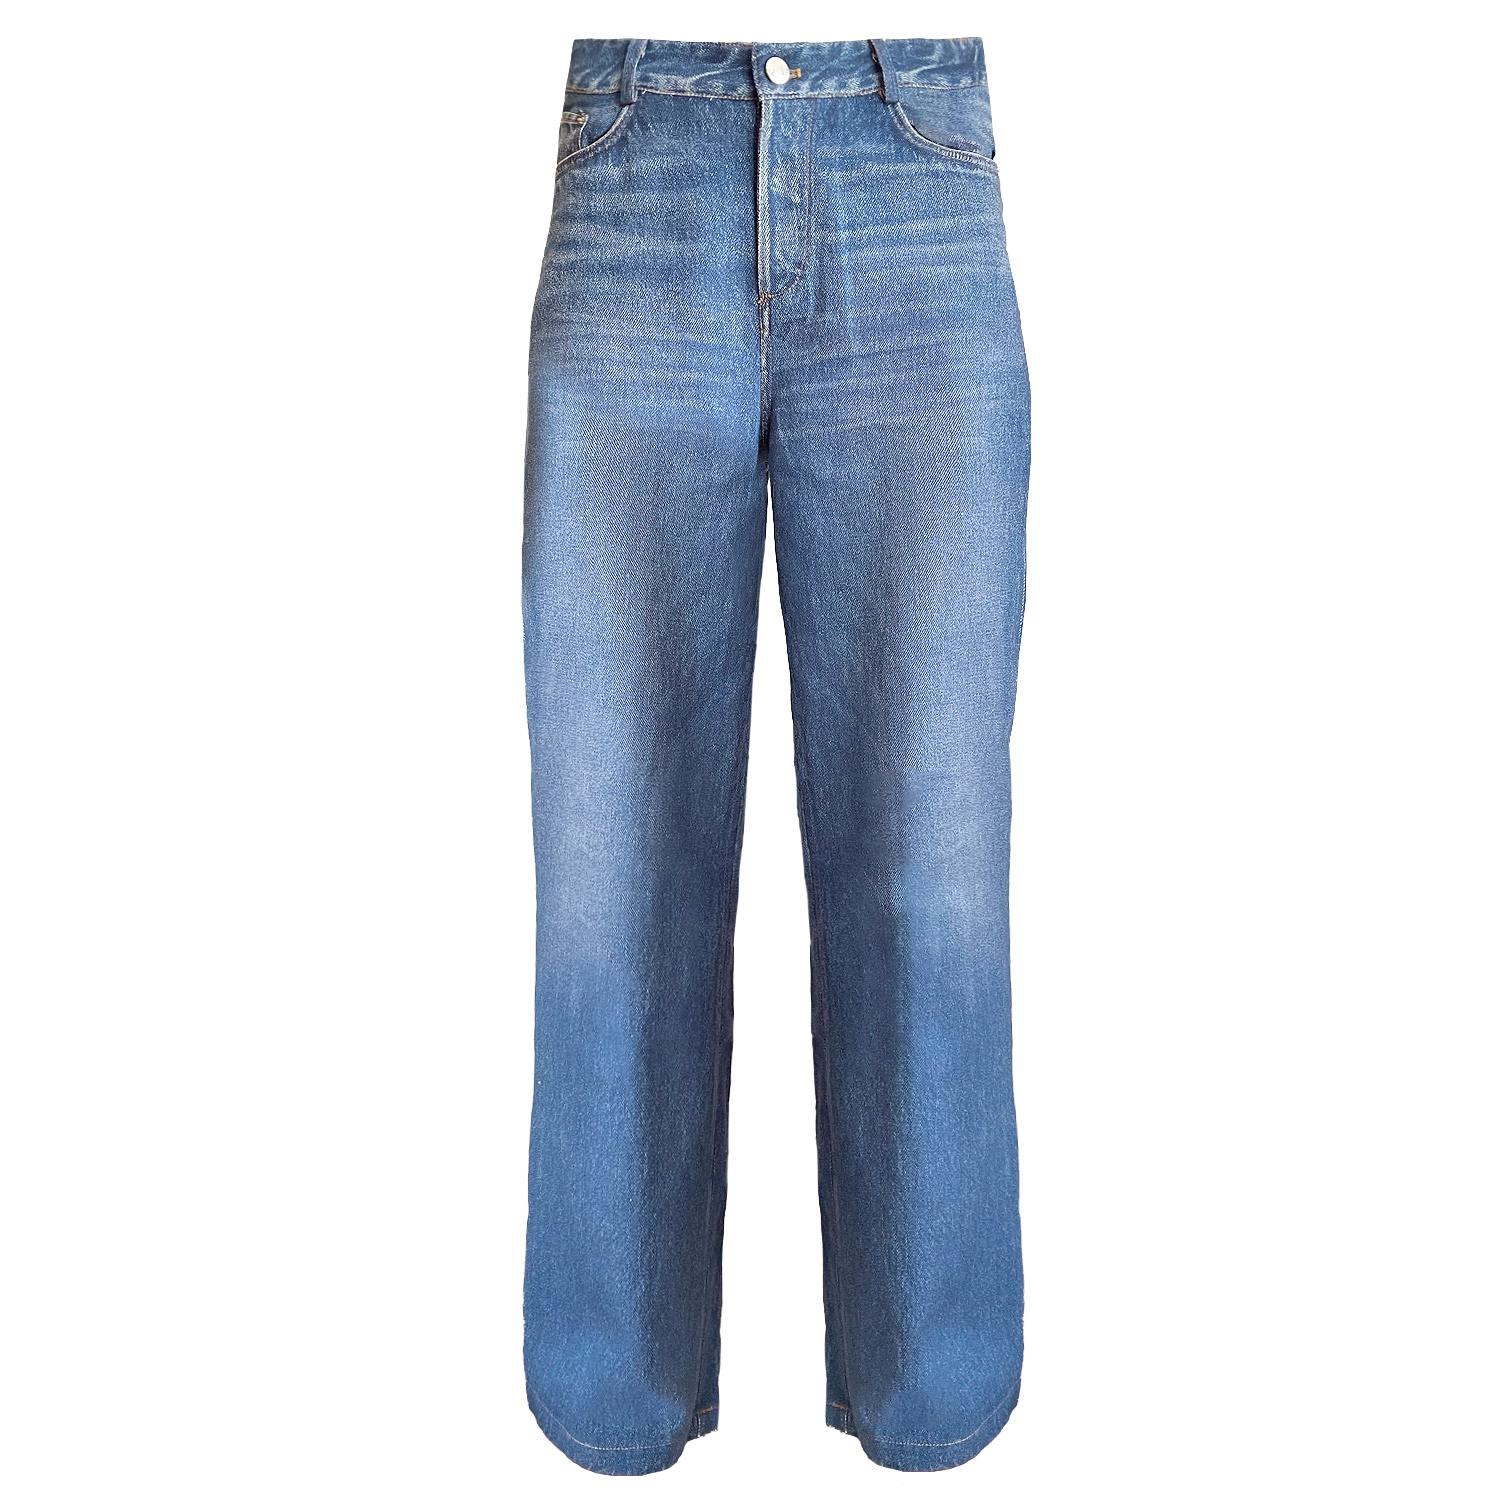 Elsie & Fred Ride On Time Embossed Oversized 90s Jeans in Blue